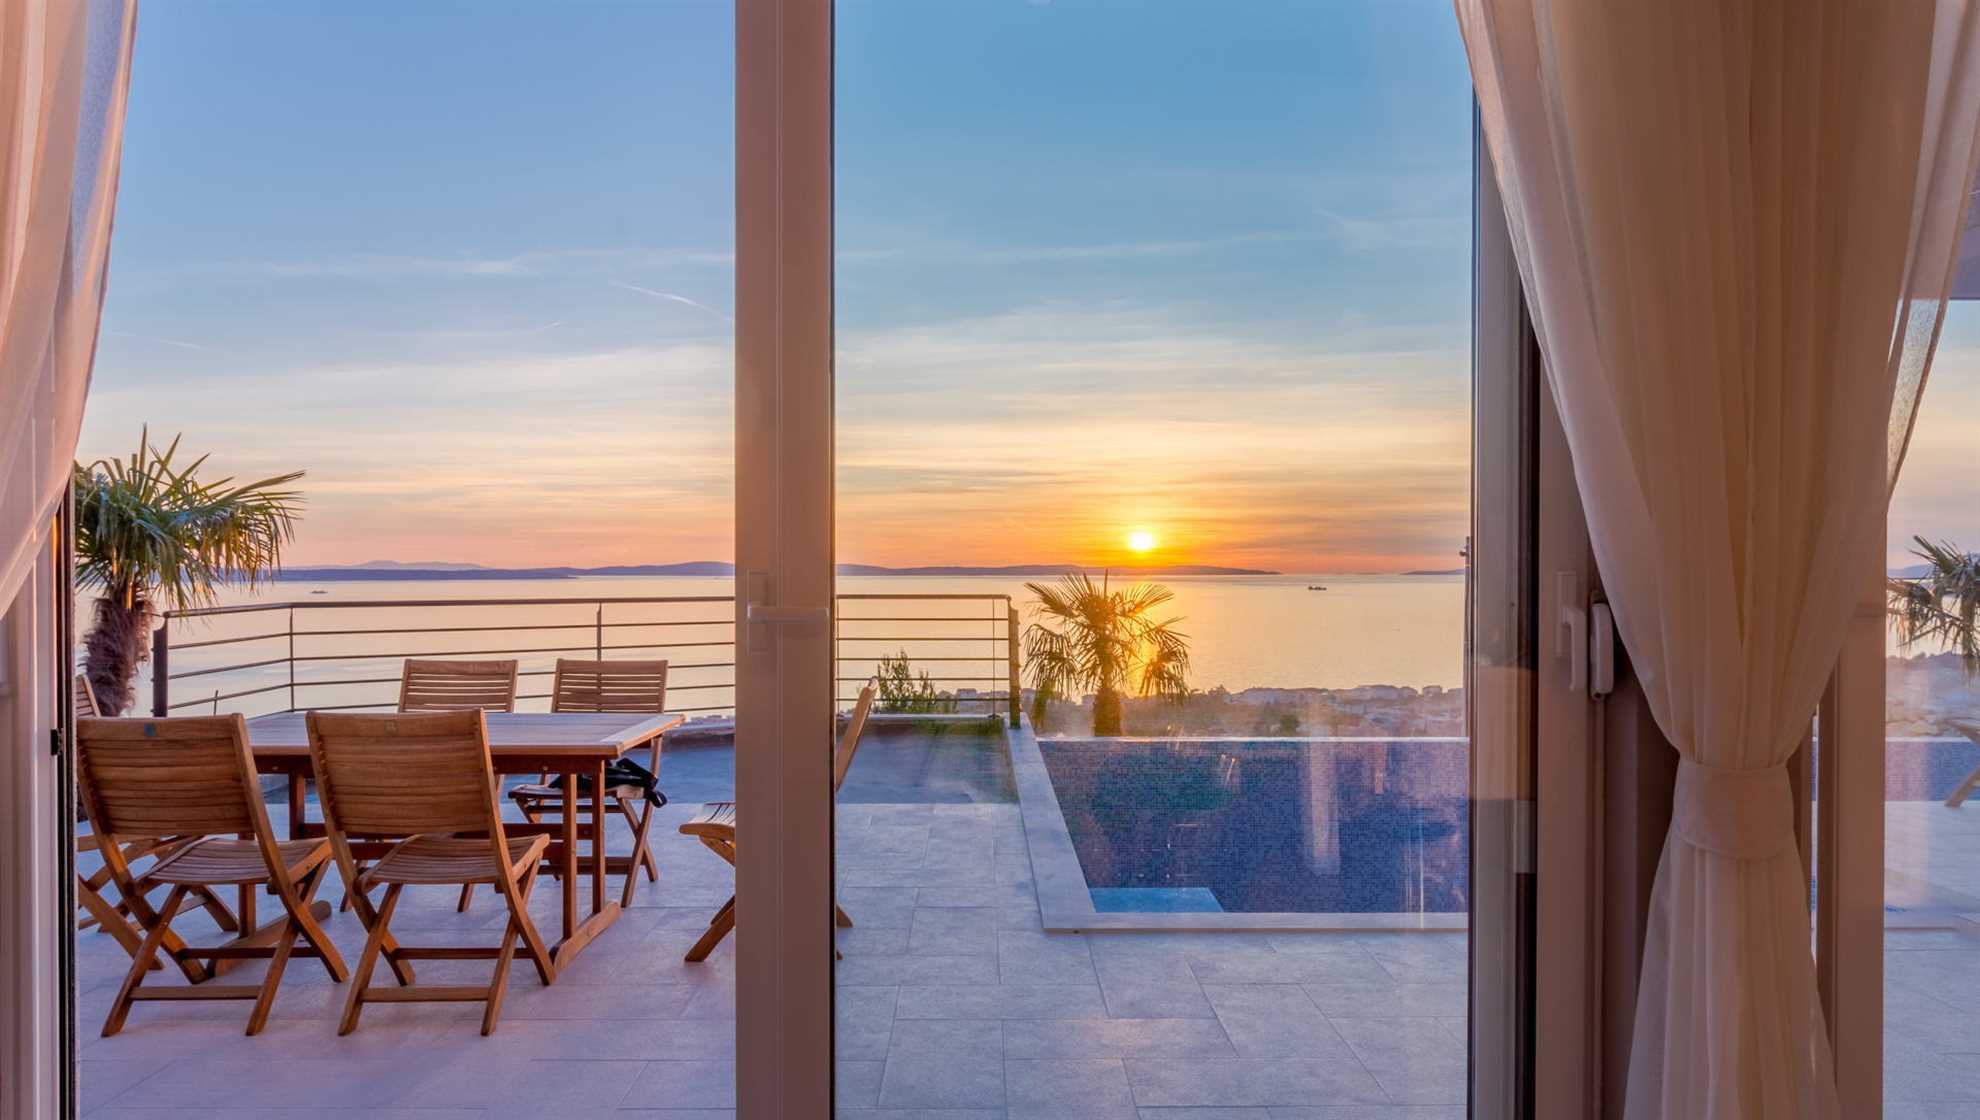 Property Image 2 - Superb Vast Villa with Sunrise View from the Terrace